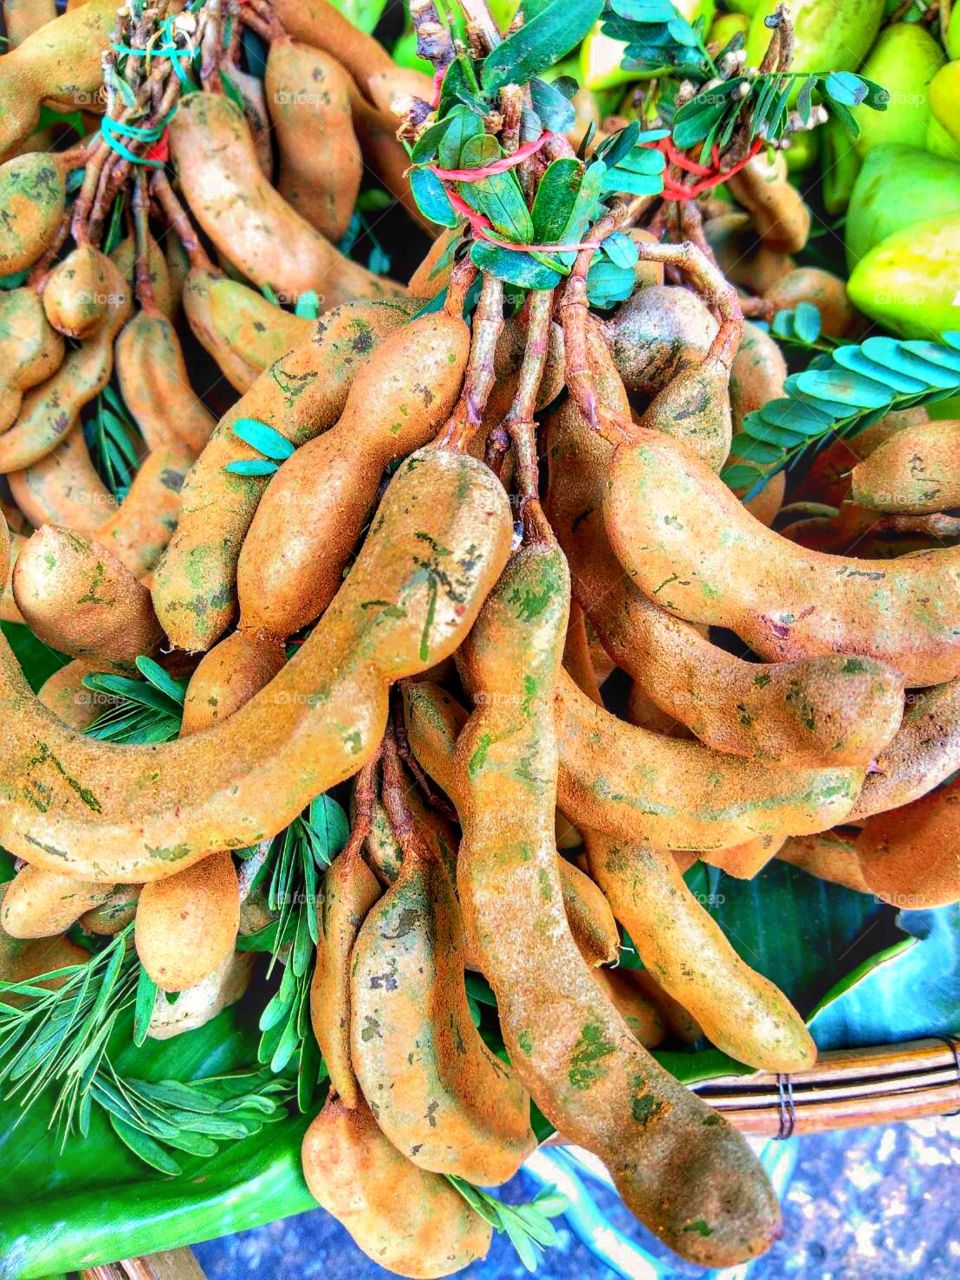 Tamarind for sale in the market.